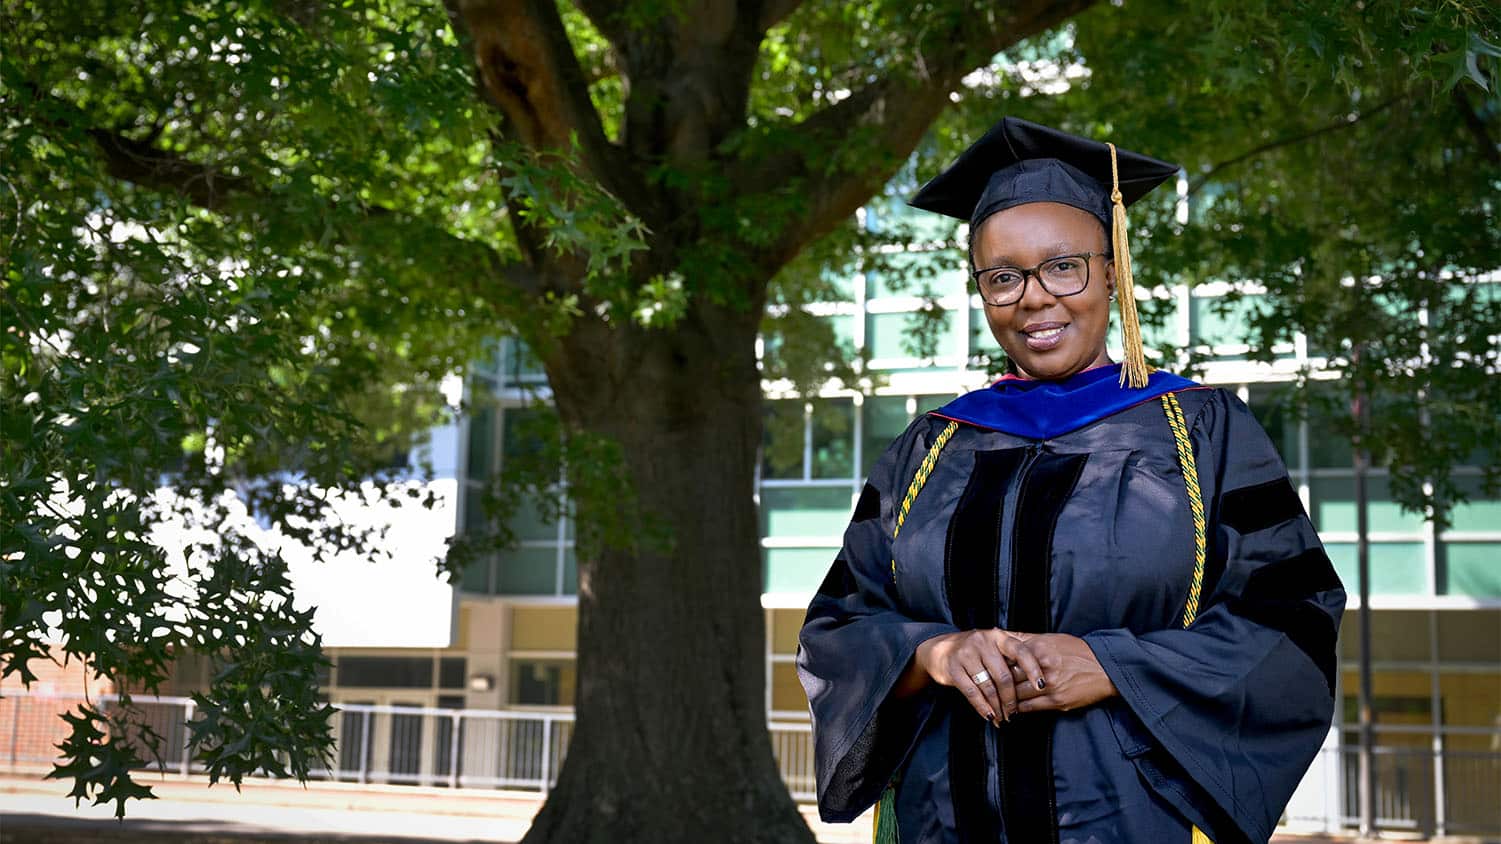 A doctoral graduate student in her cap and gown stands before an large oak tree.